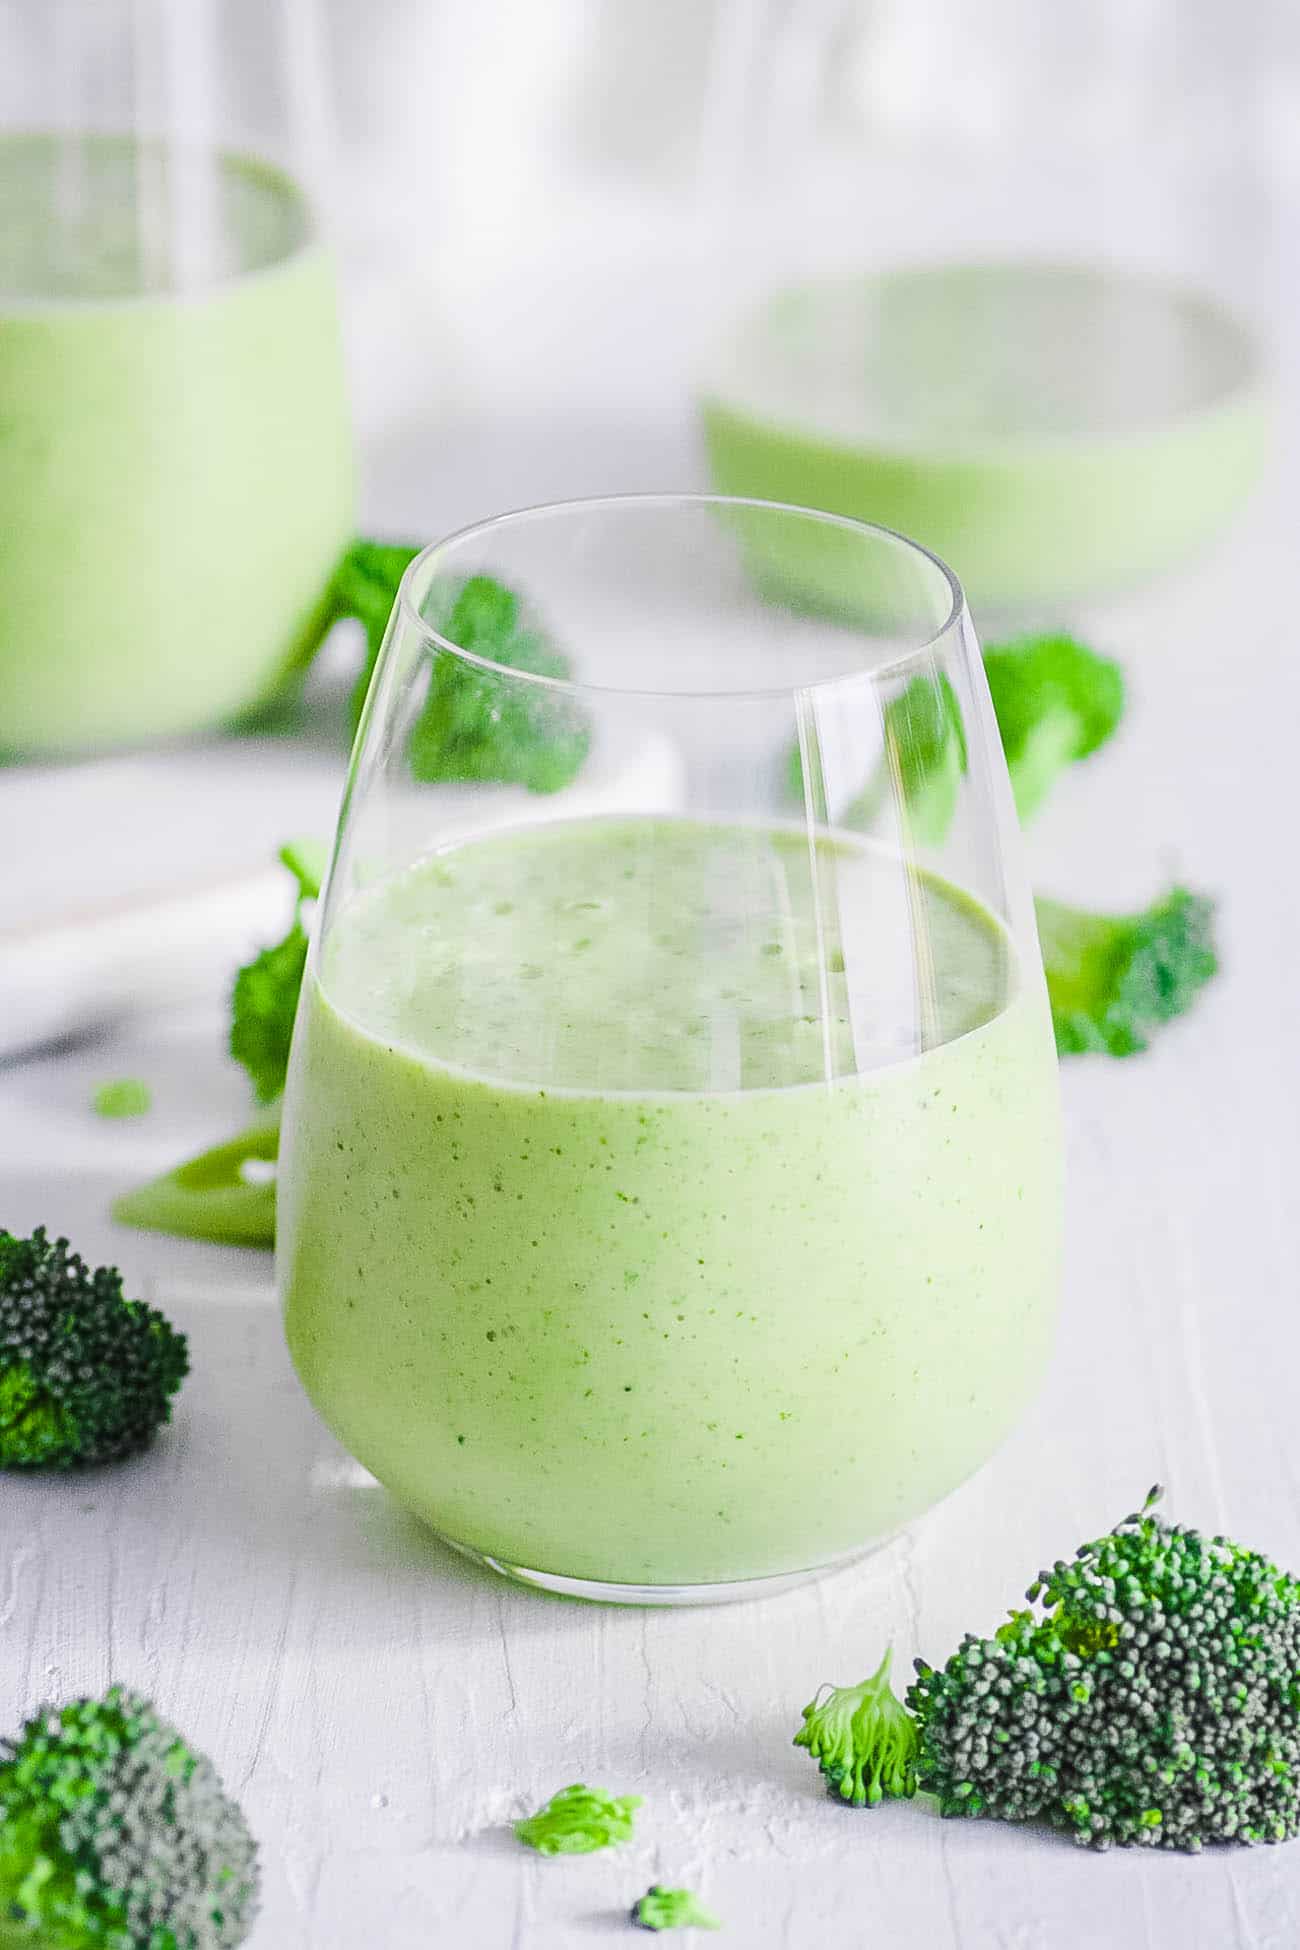 easy healthy vegan gluten free broccoli smoothie recipe with banana in a glass